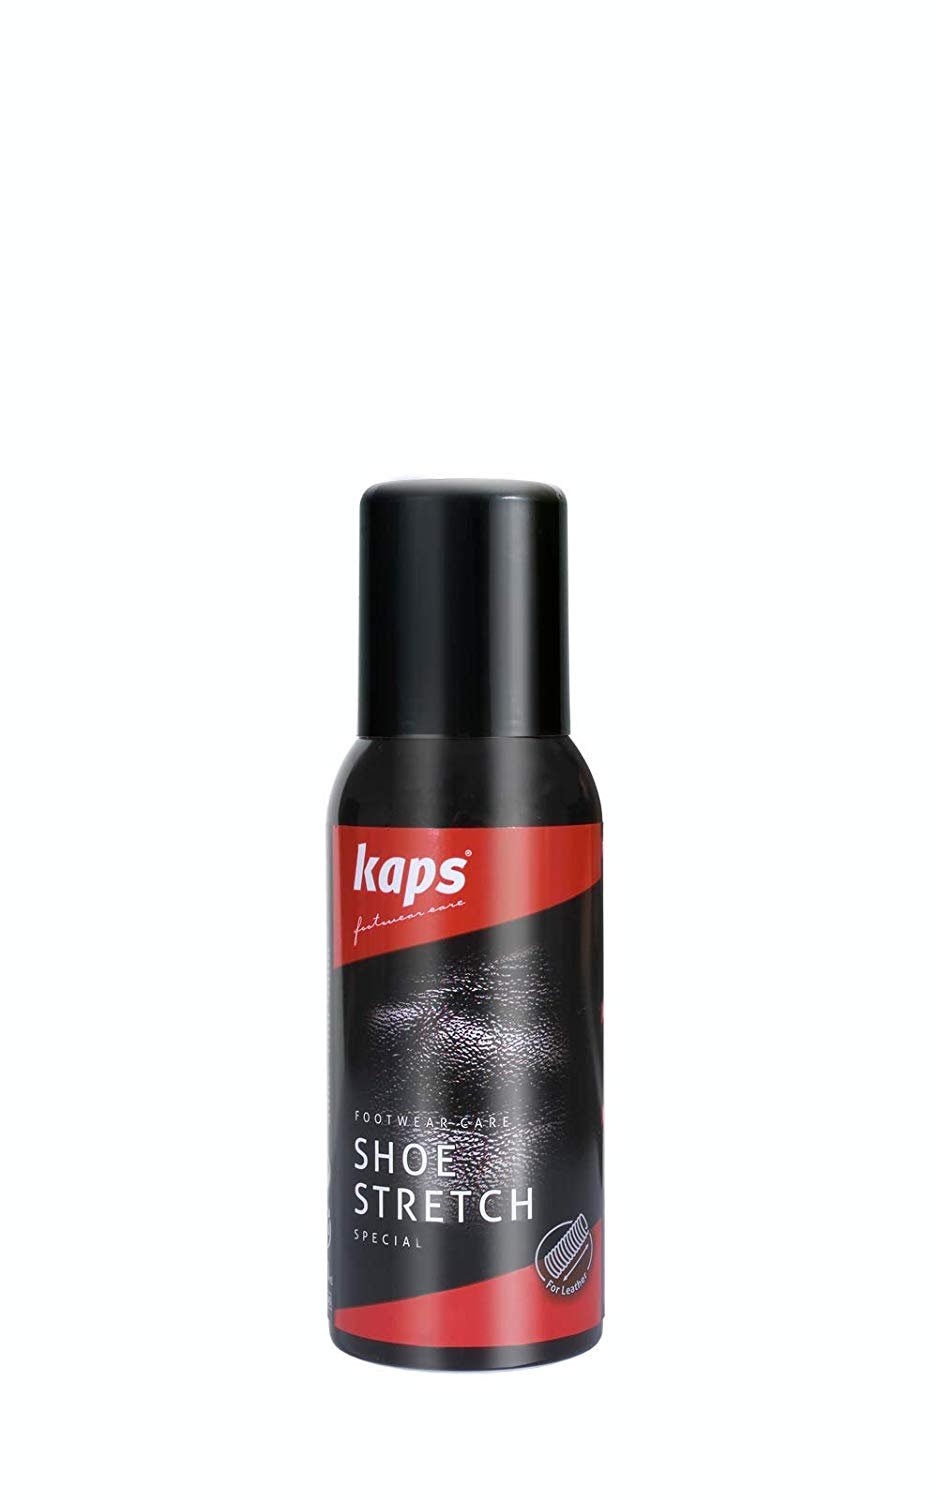 what is in shoe stretch spray